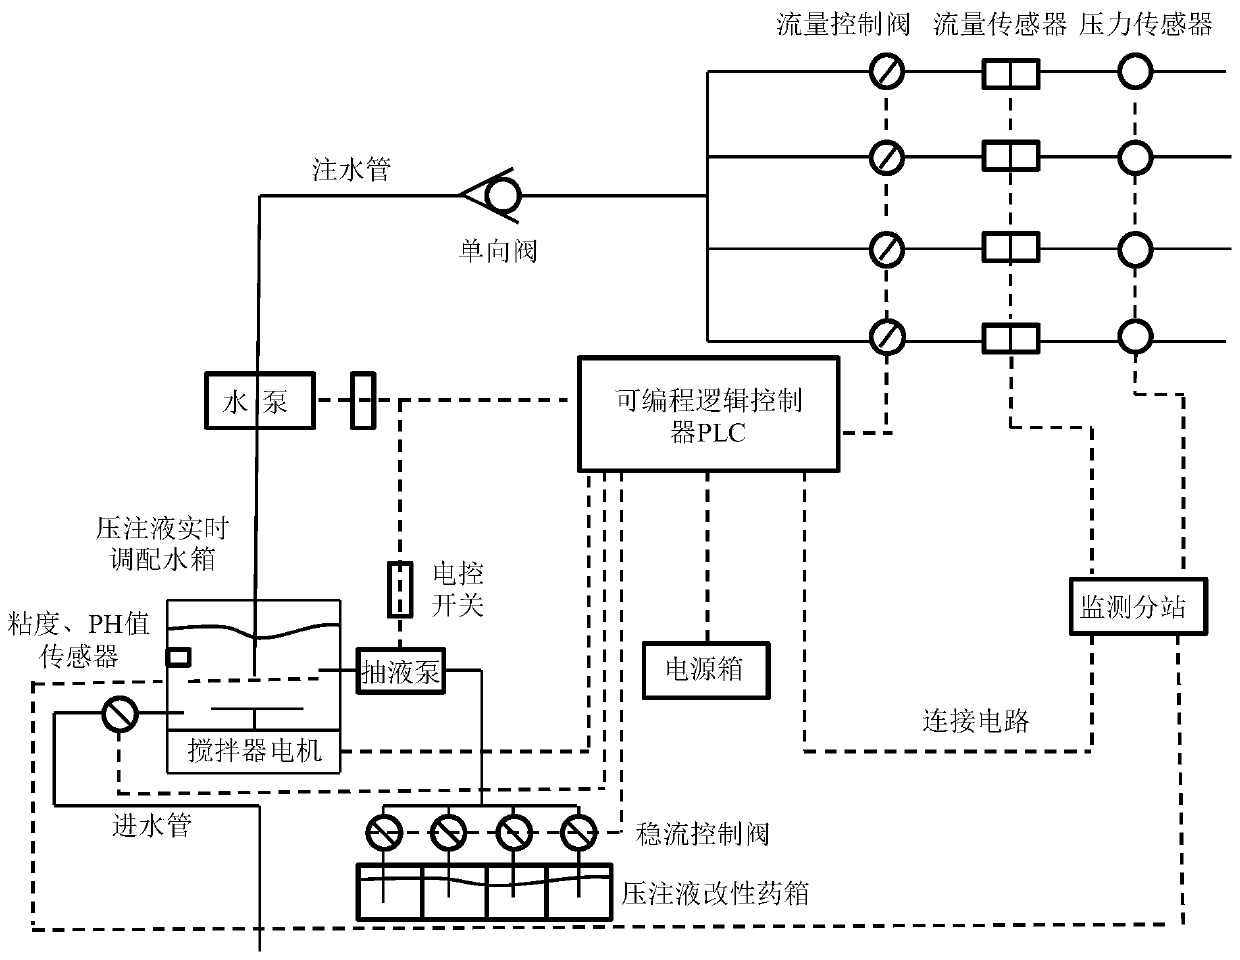 Coal seam step-by-step water injection precise control system and water injection method